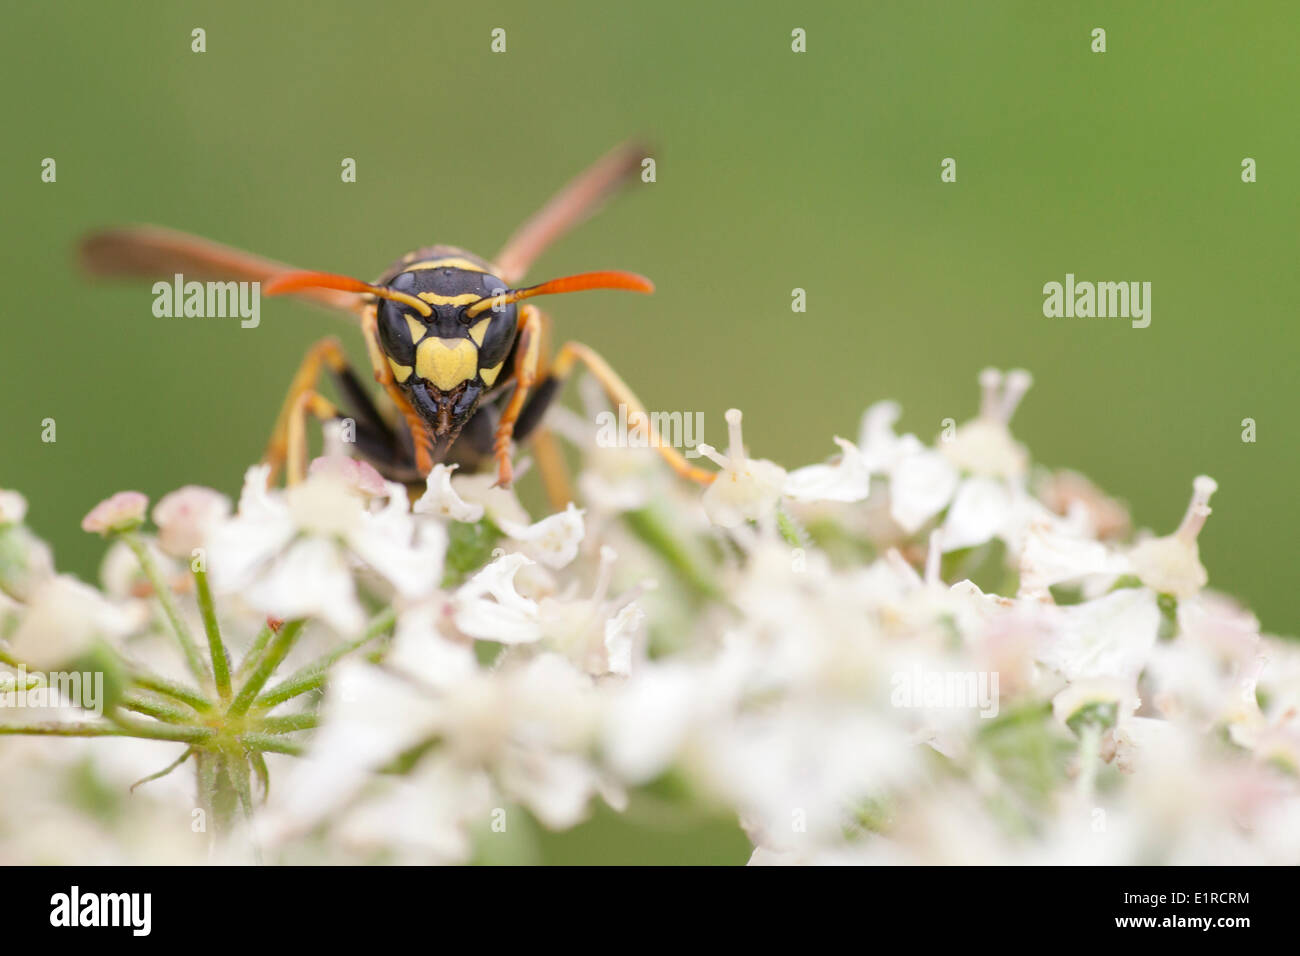 The European Paper Wasp extends its distribution area northwards because of the global warming. Stock Photo